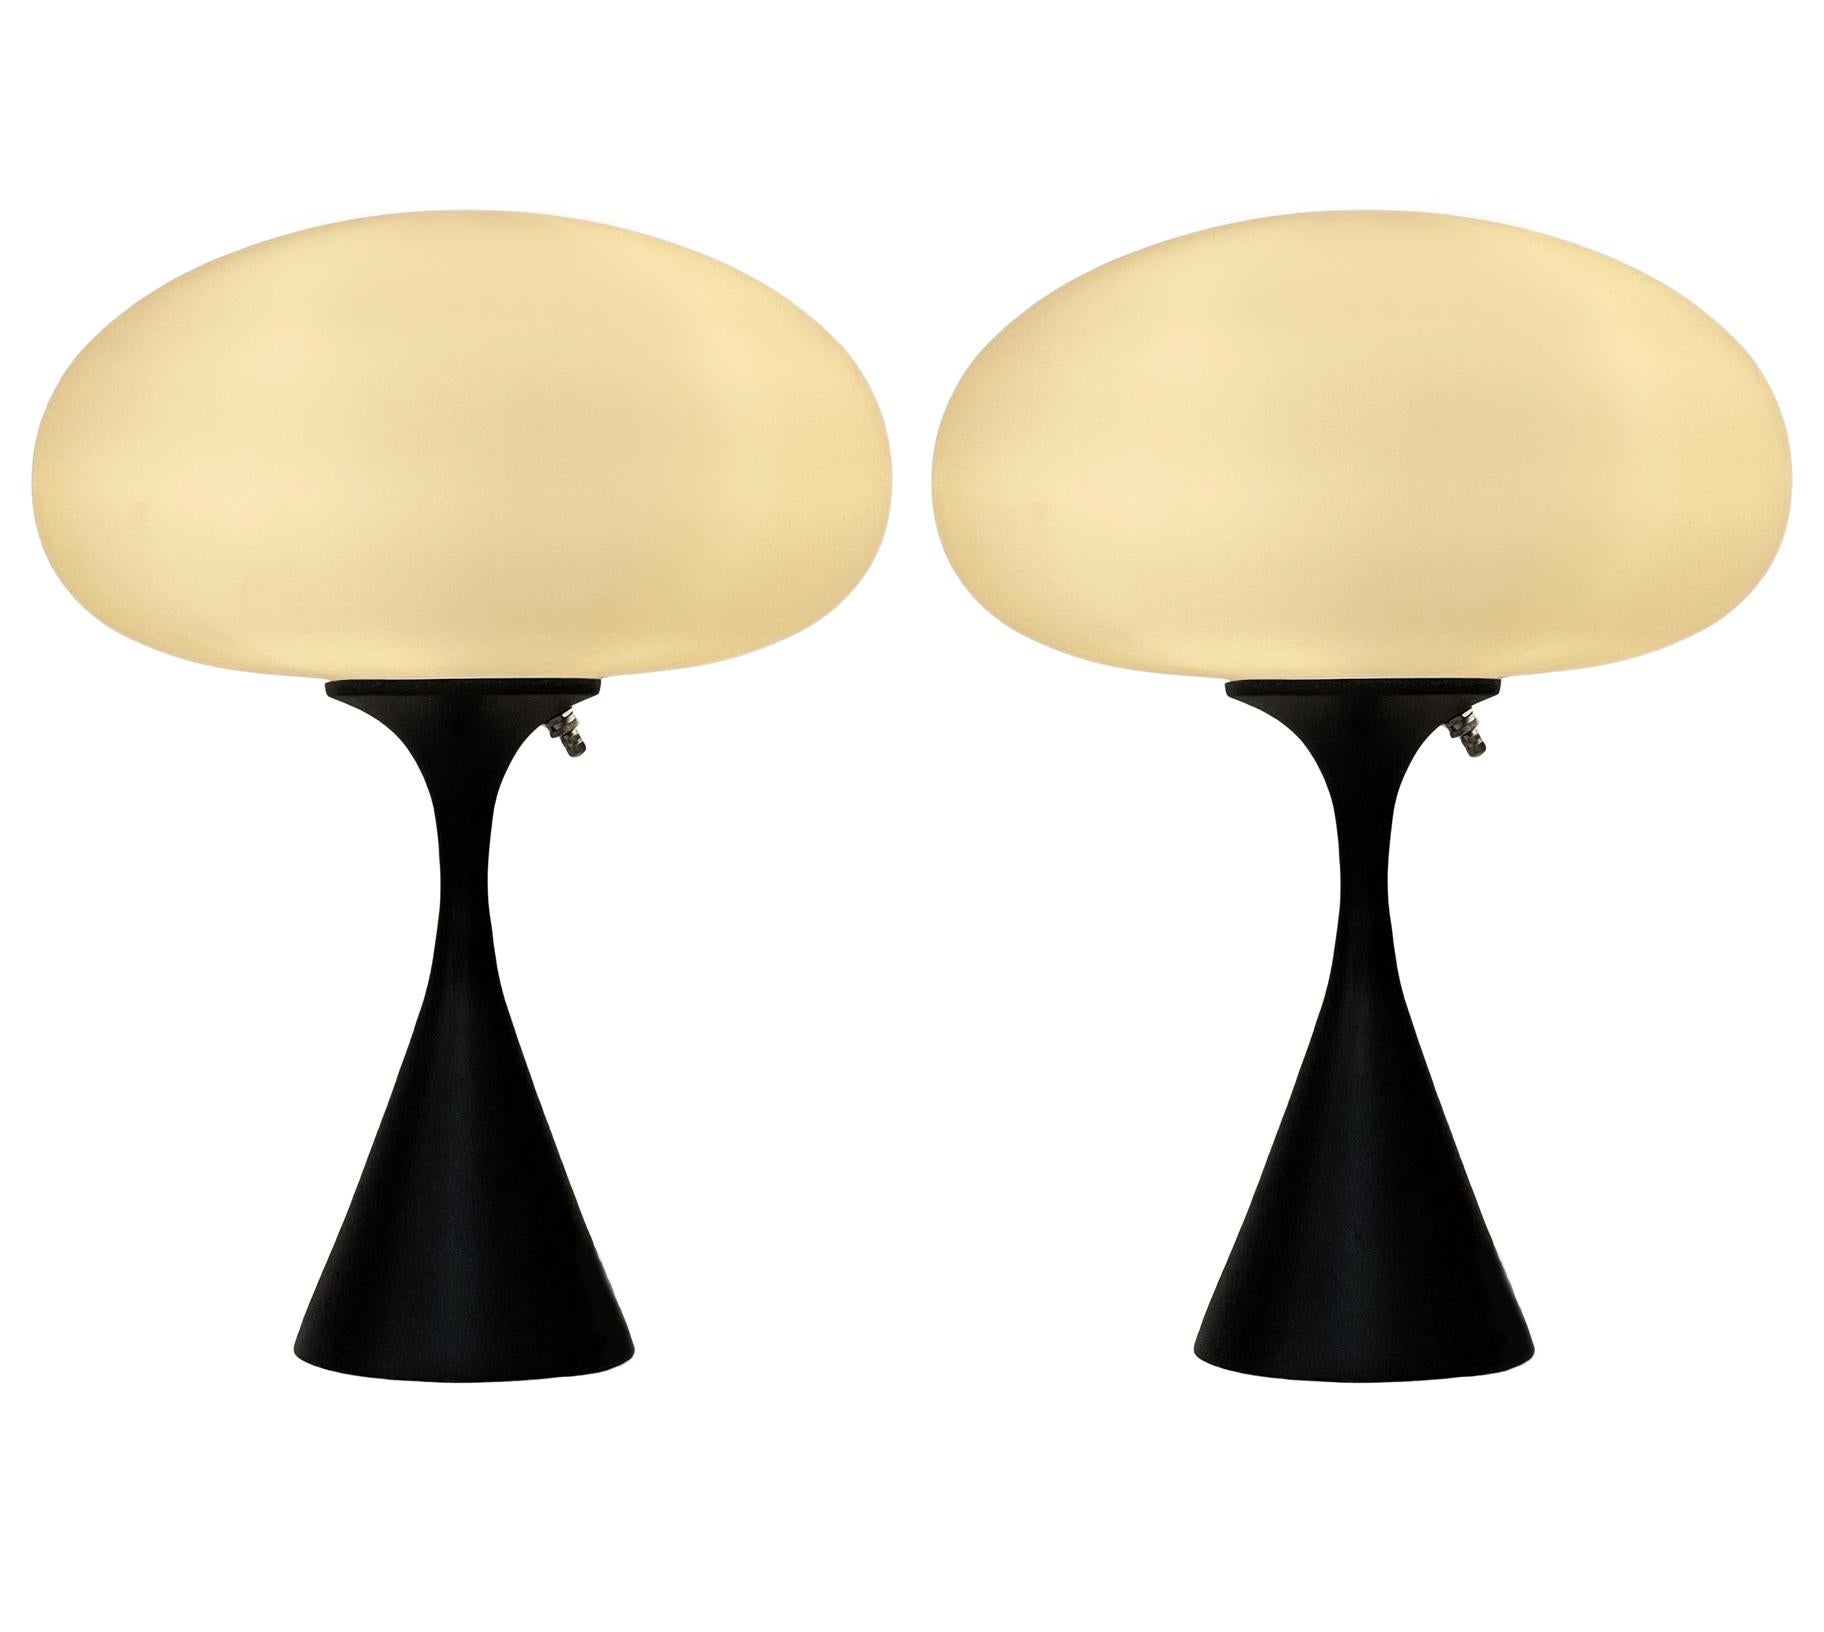 Aluminum Pair of Mid-Century Modern Table Lamps by Designline in Black & White Glass For Sale